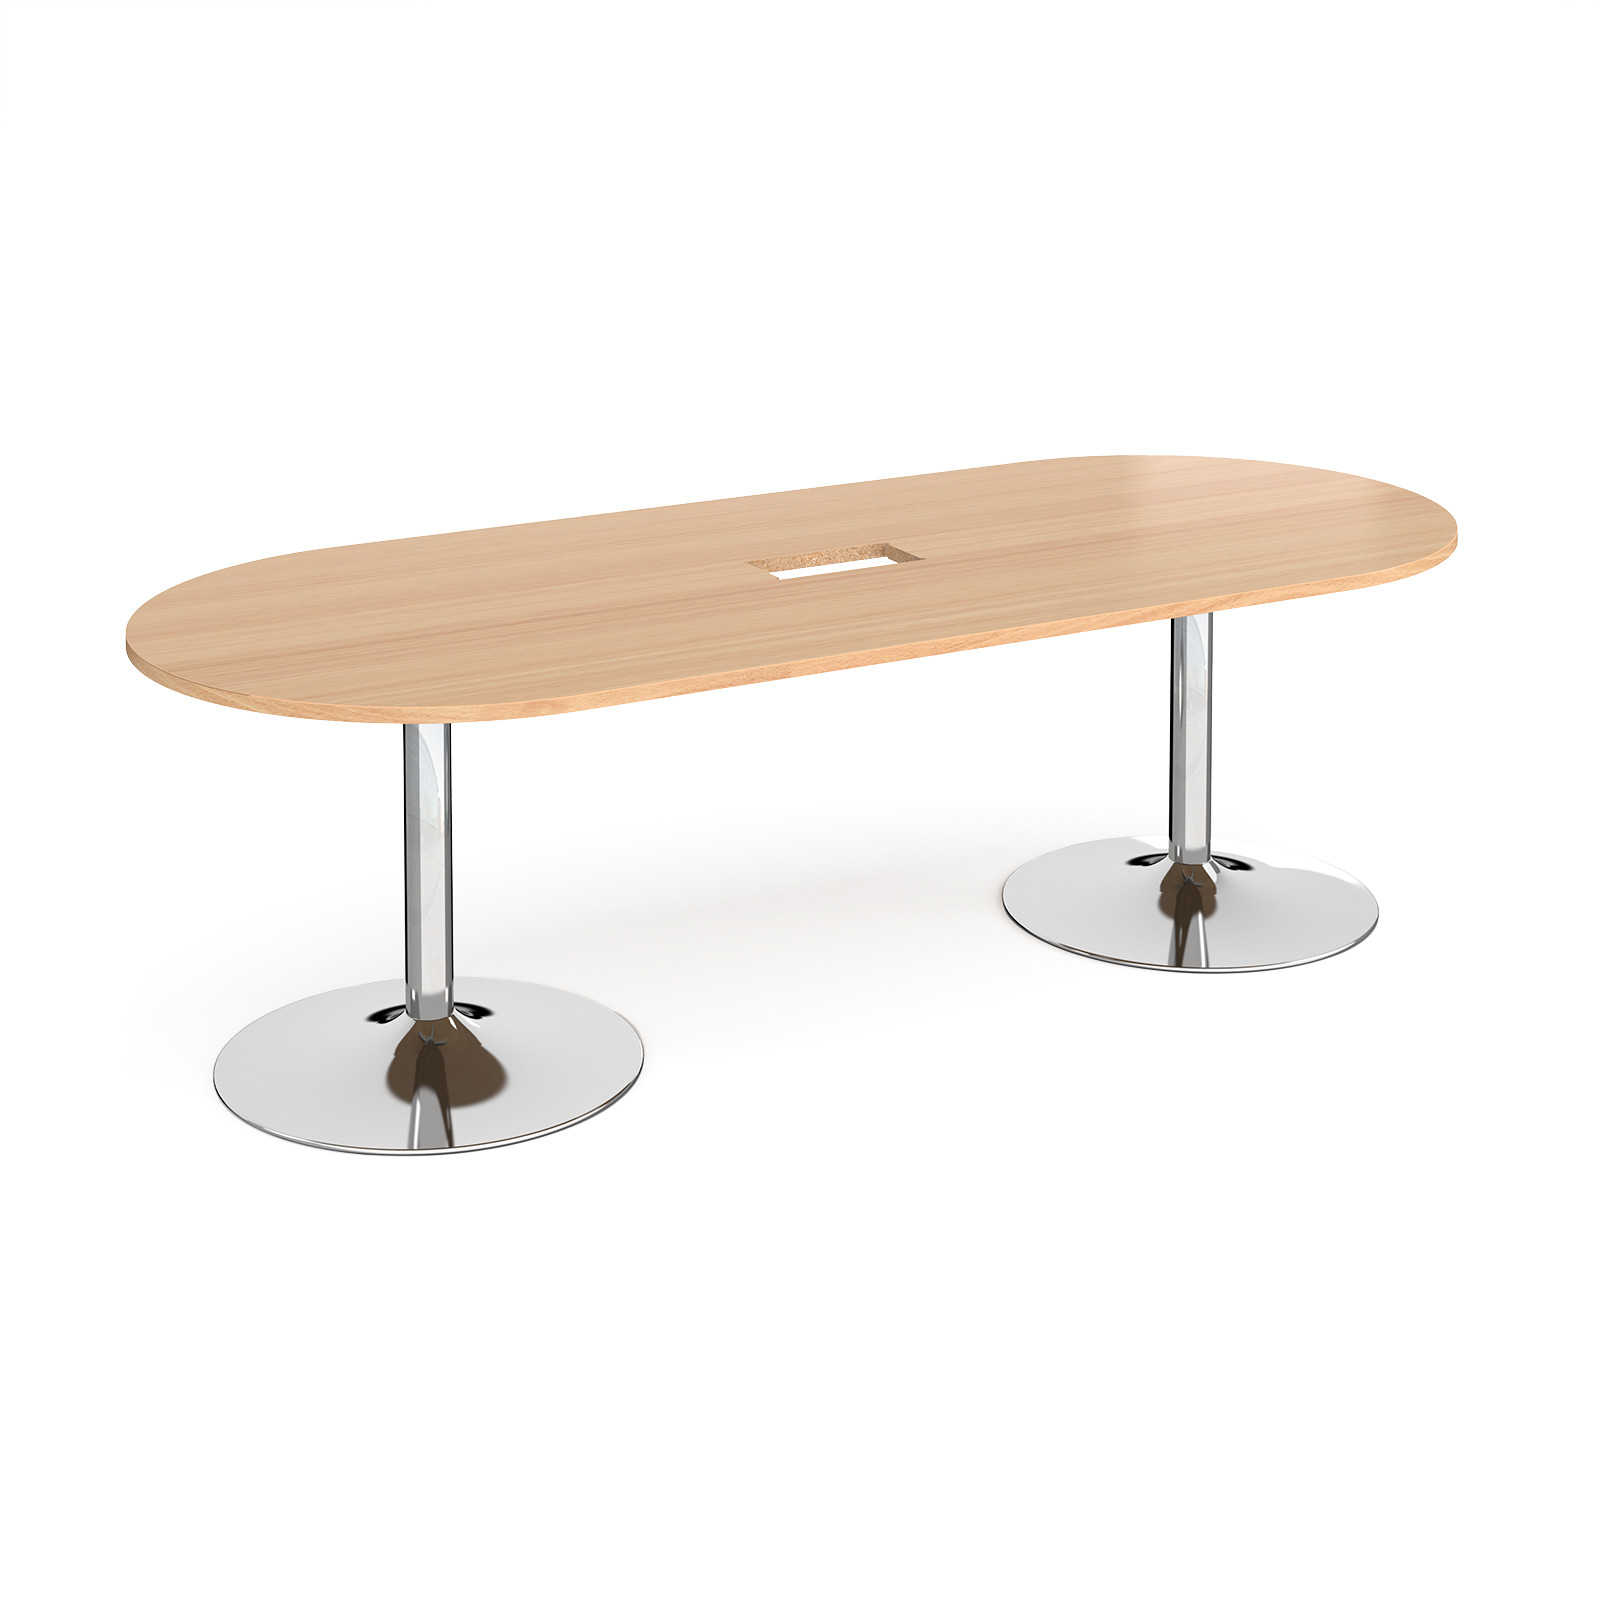 Trumpet base radial end boardroom table 2400mm x 1000mm with central cutout 272mm x 132mm - chrome base, beech top